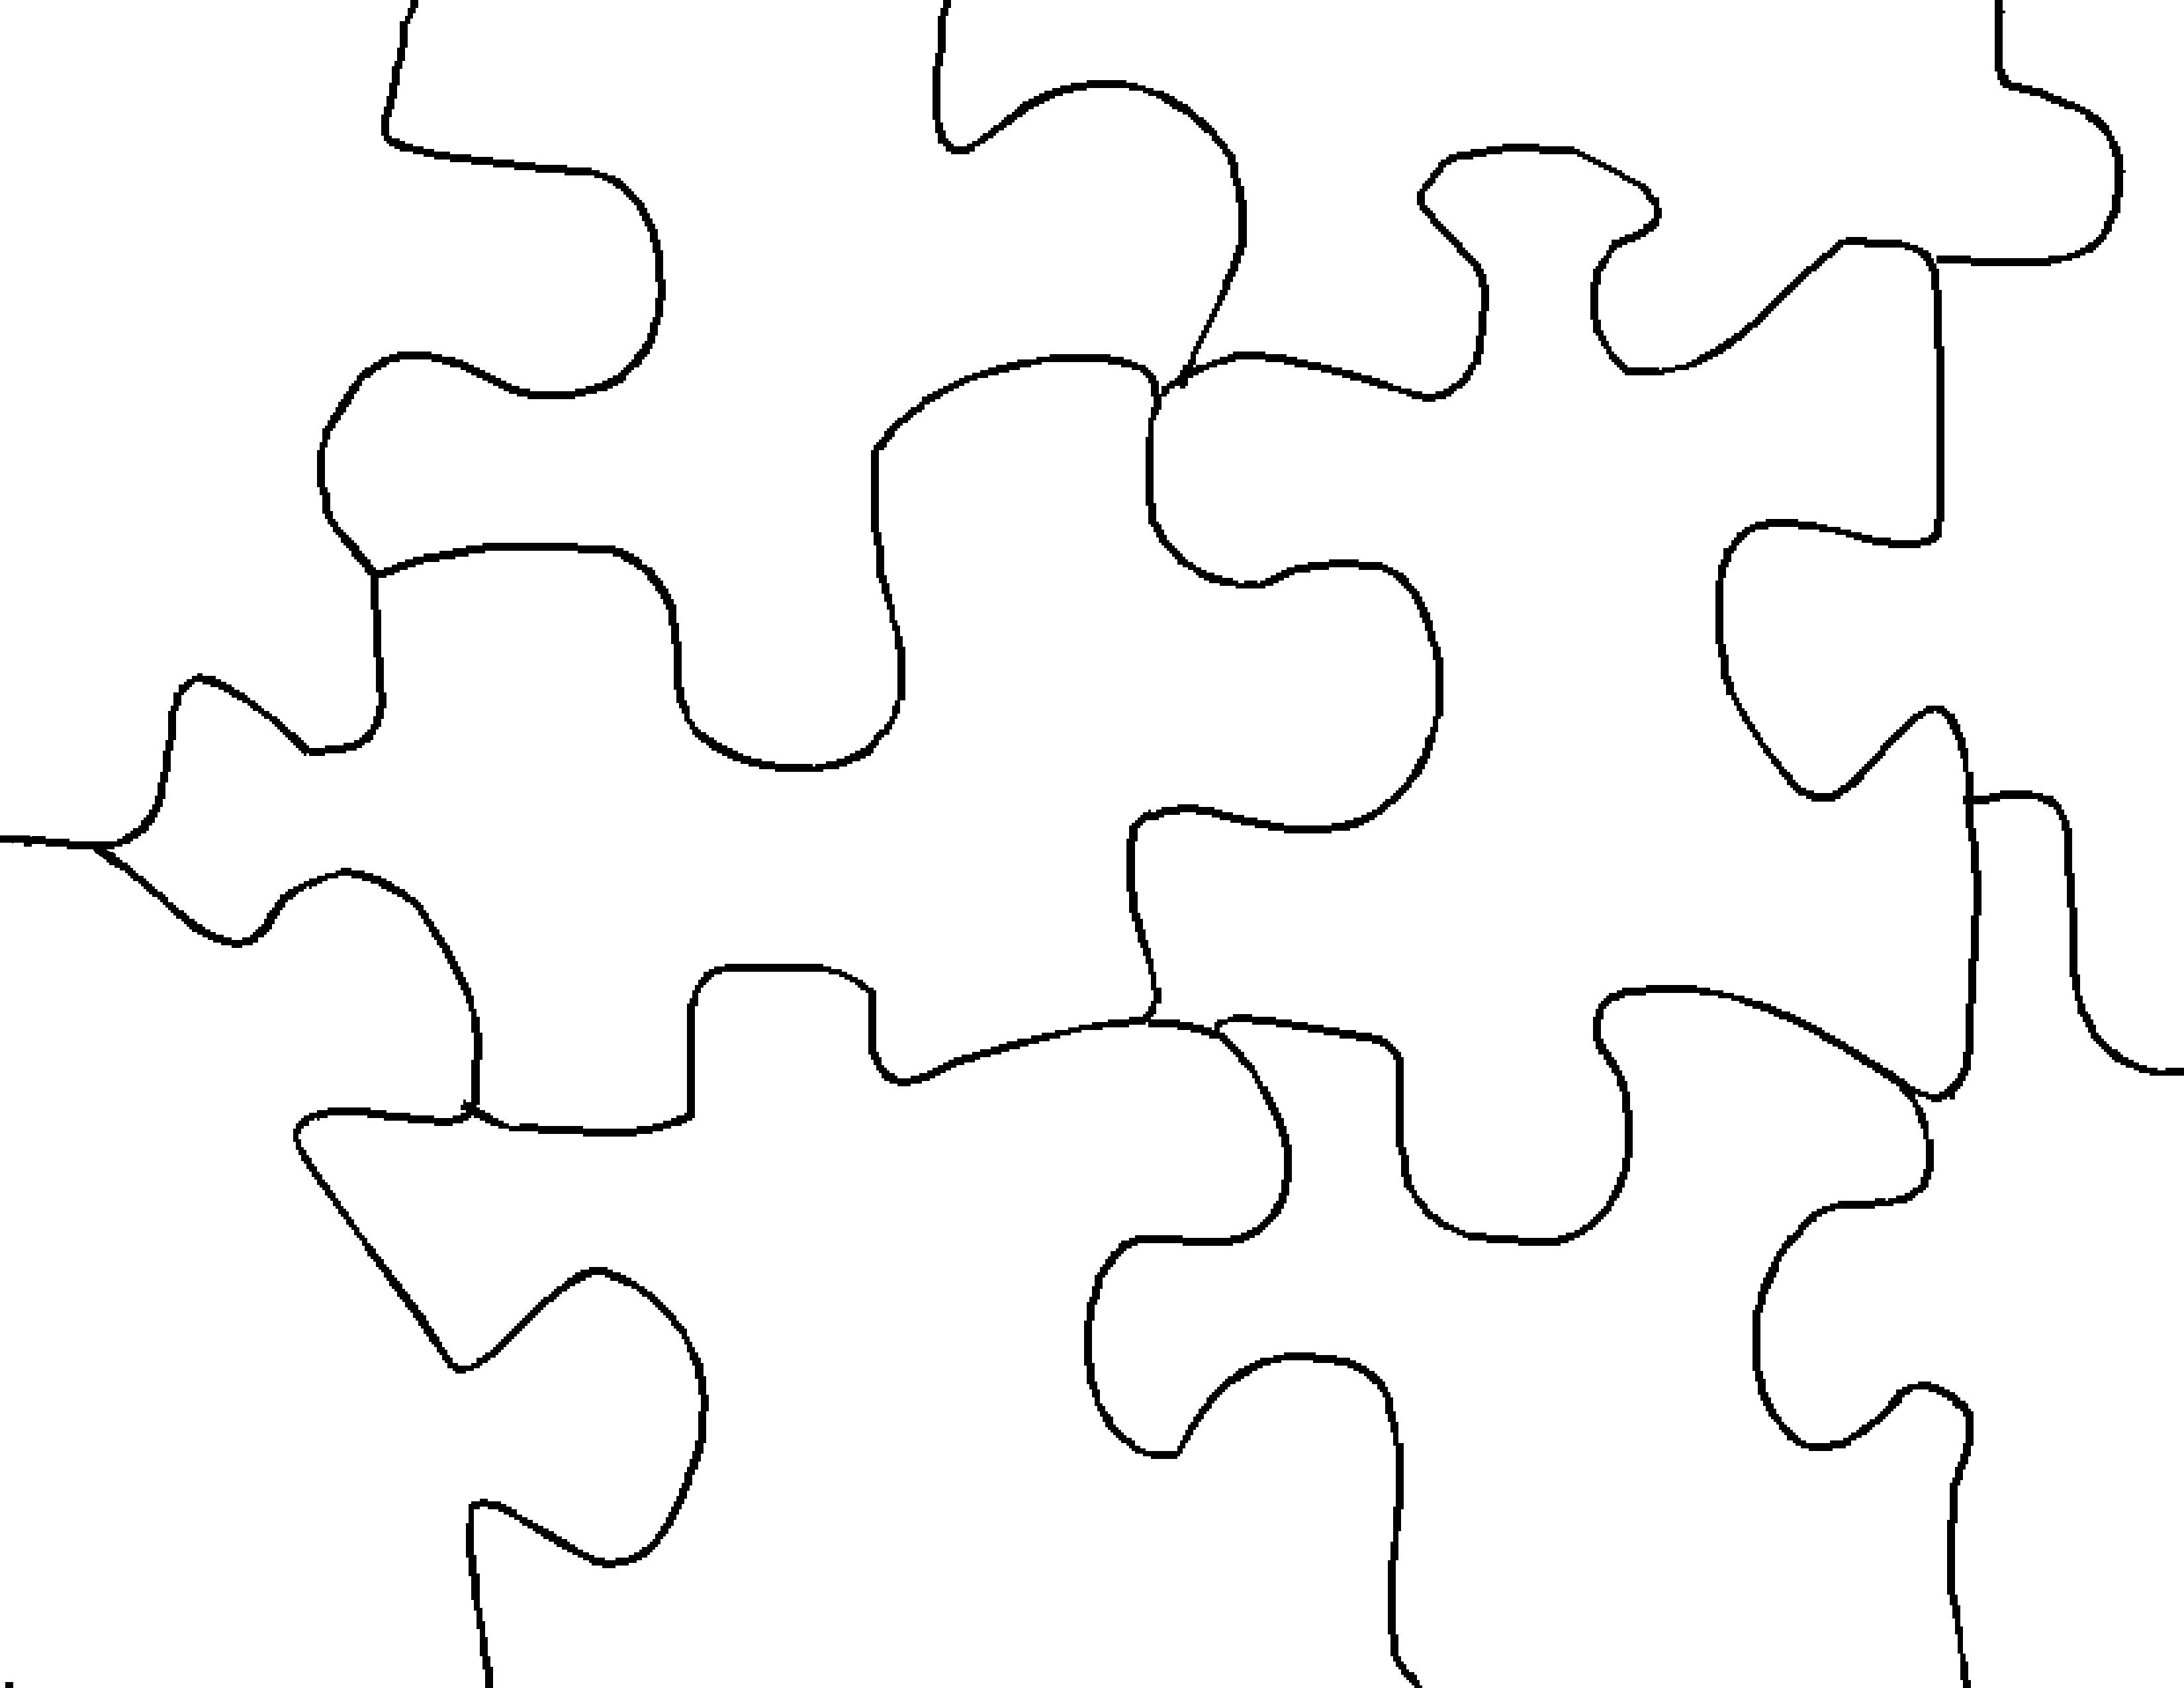 Free Puzzle Template, Download Free Clip Art, Free Clip Art.